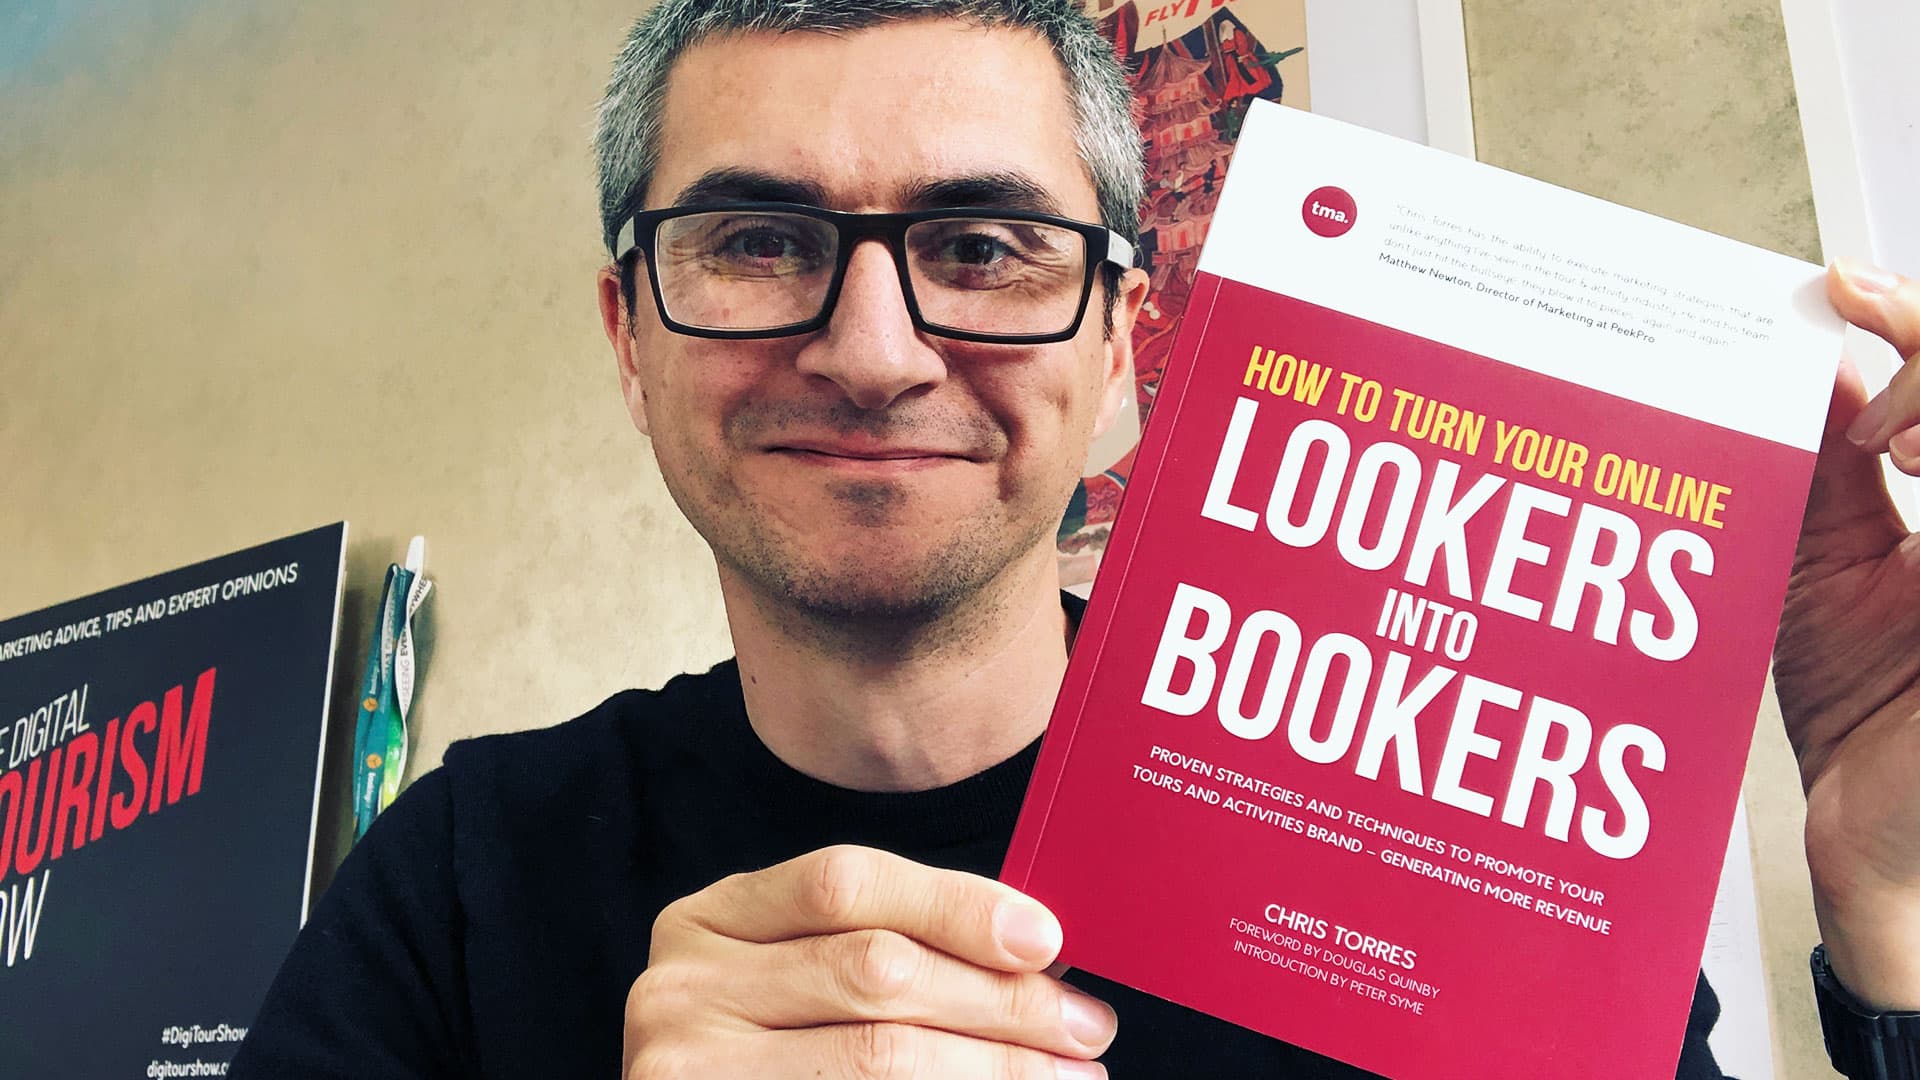 How to Turn your Online Lookers into Bookers